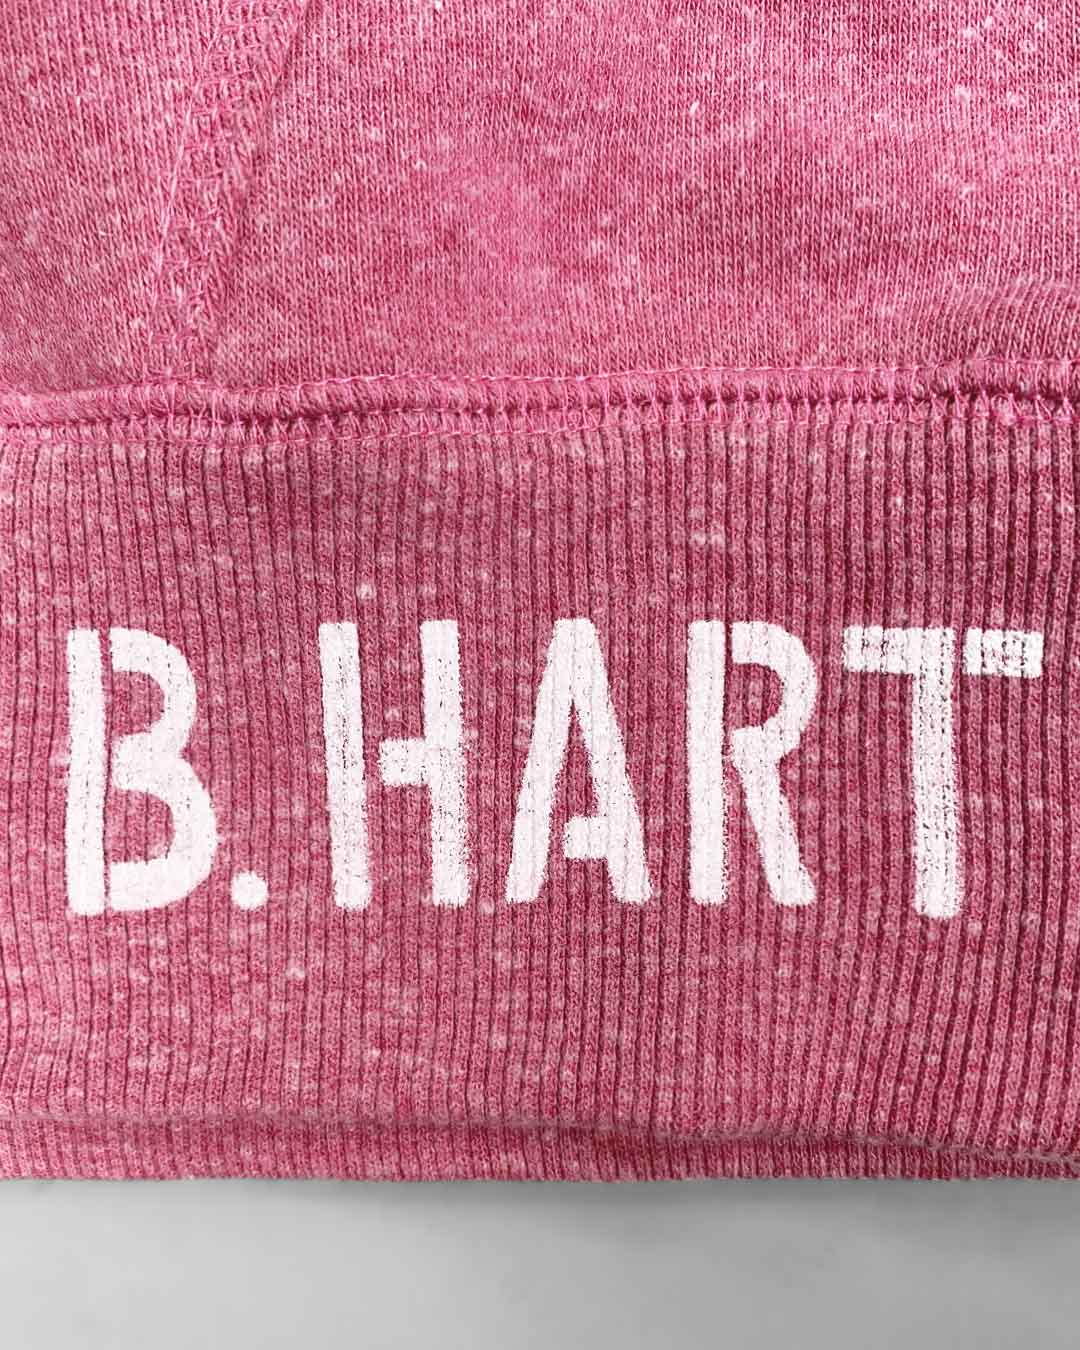 Bret Hart Hitman Classic Pullover Hoody - Roots of Fight Canada